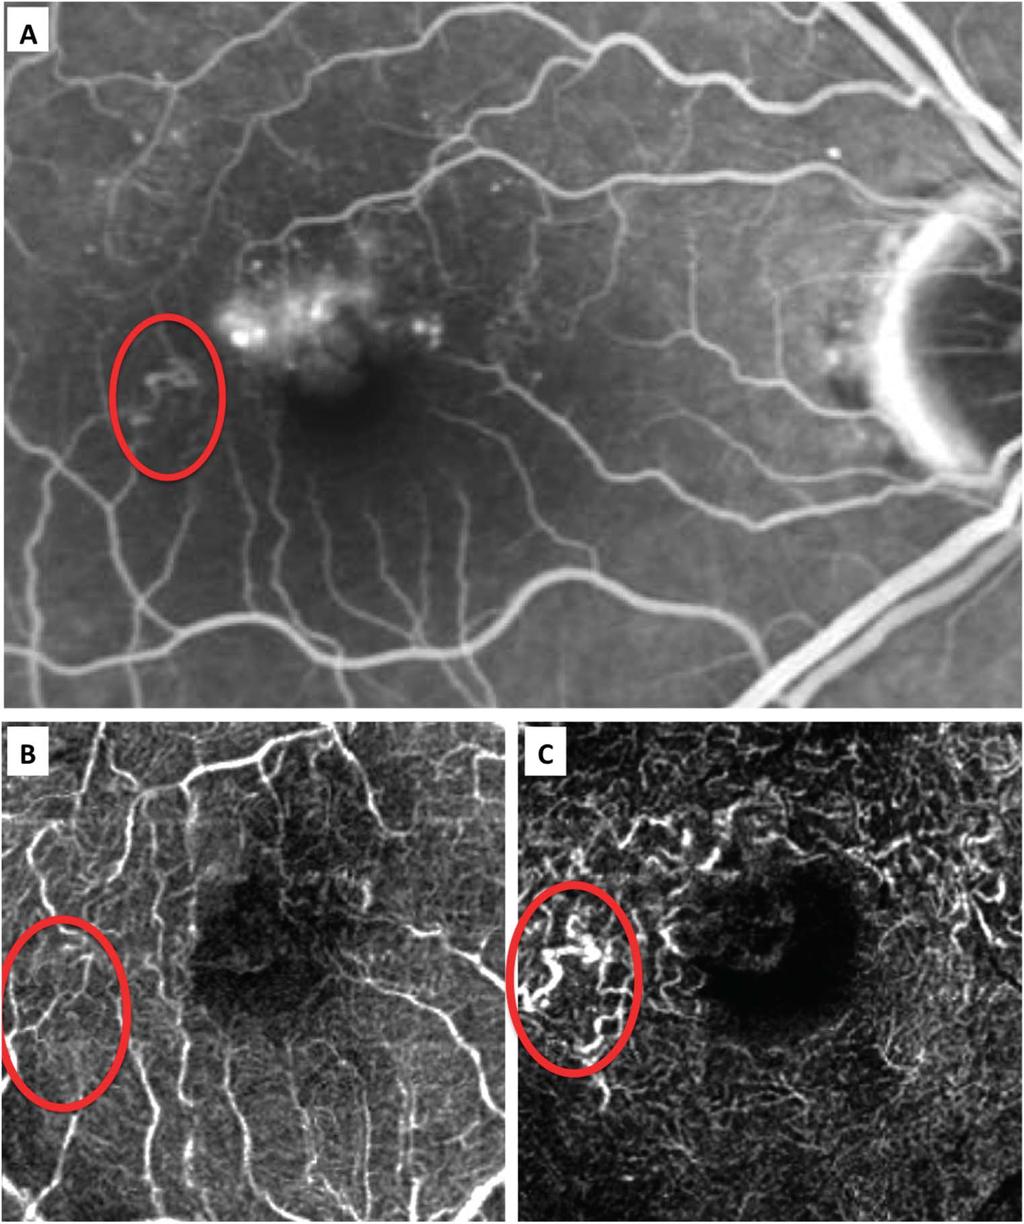 OCT-ANGIOGRAPHY IN BRVO RISPOLI ET AL 2335 Fig. 2. A. Detail of microvasculature anomaly around the FAZ that does not define precisely the layer involved in fluorescein angiography.